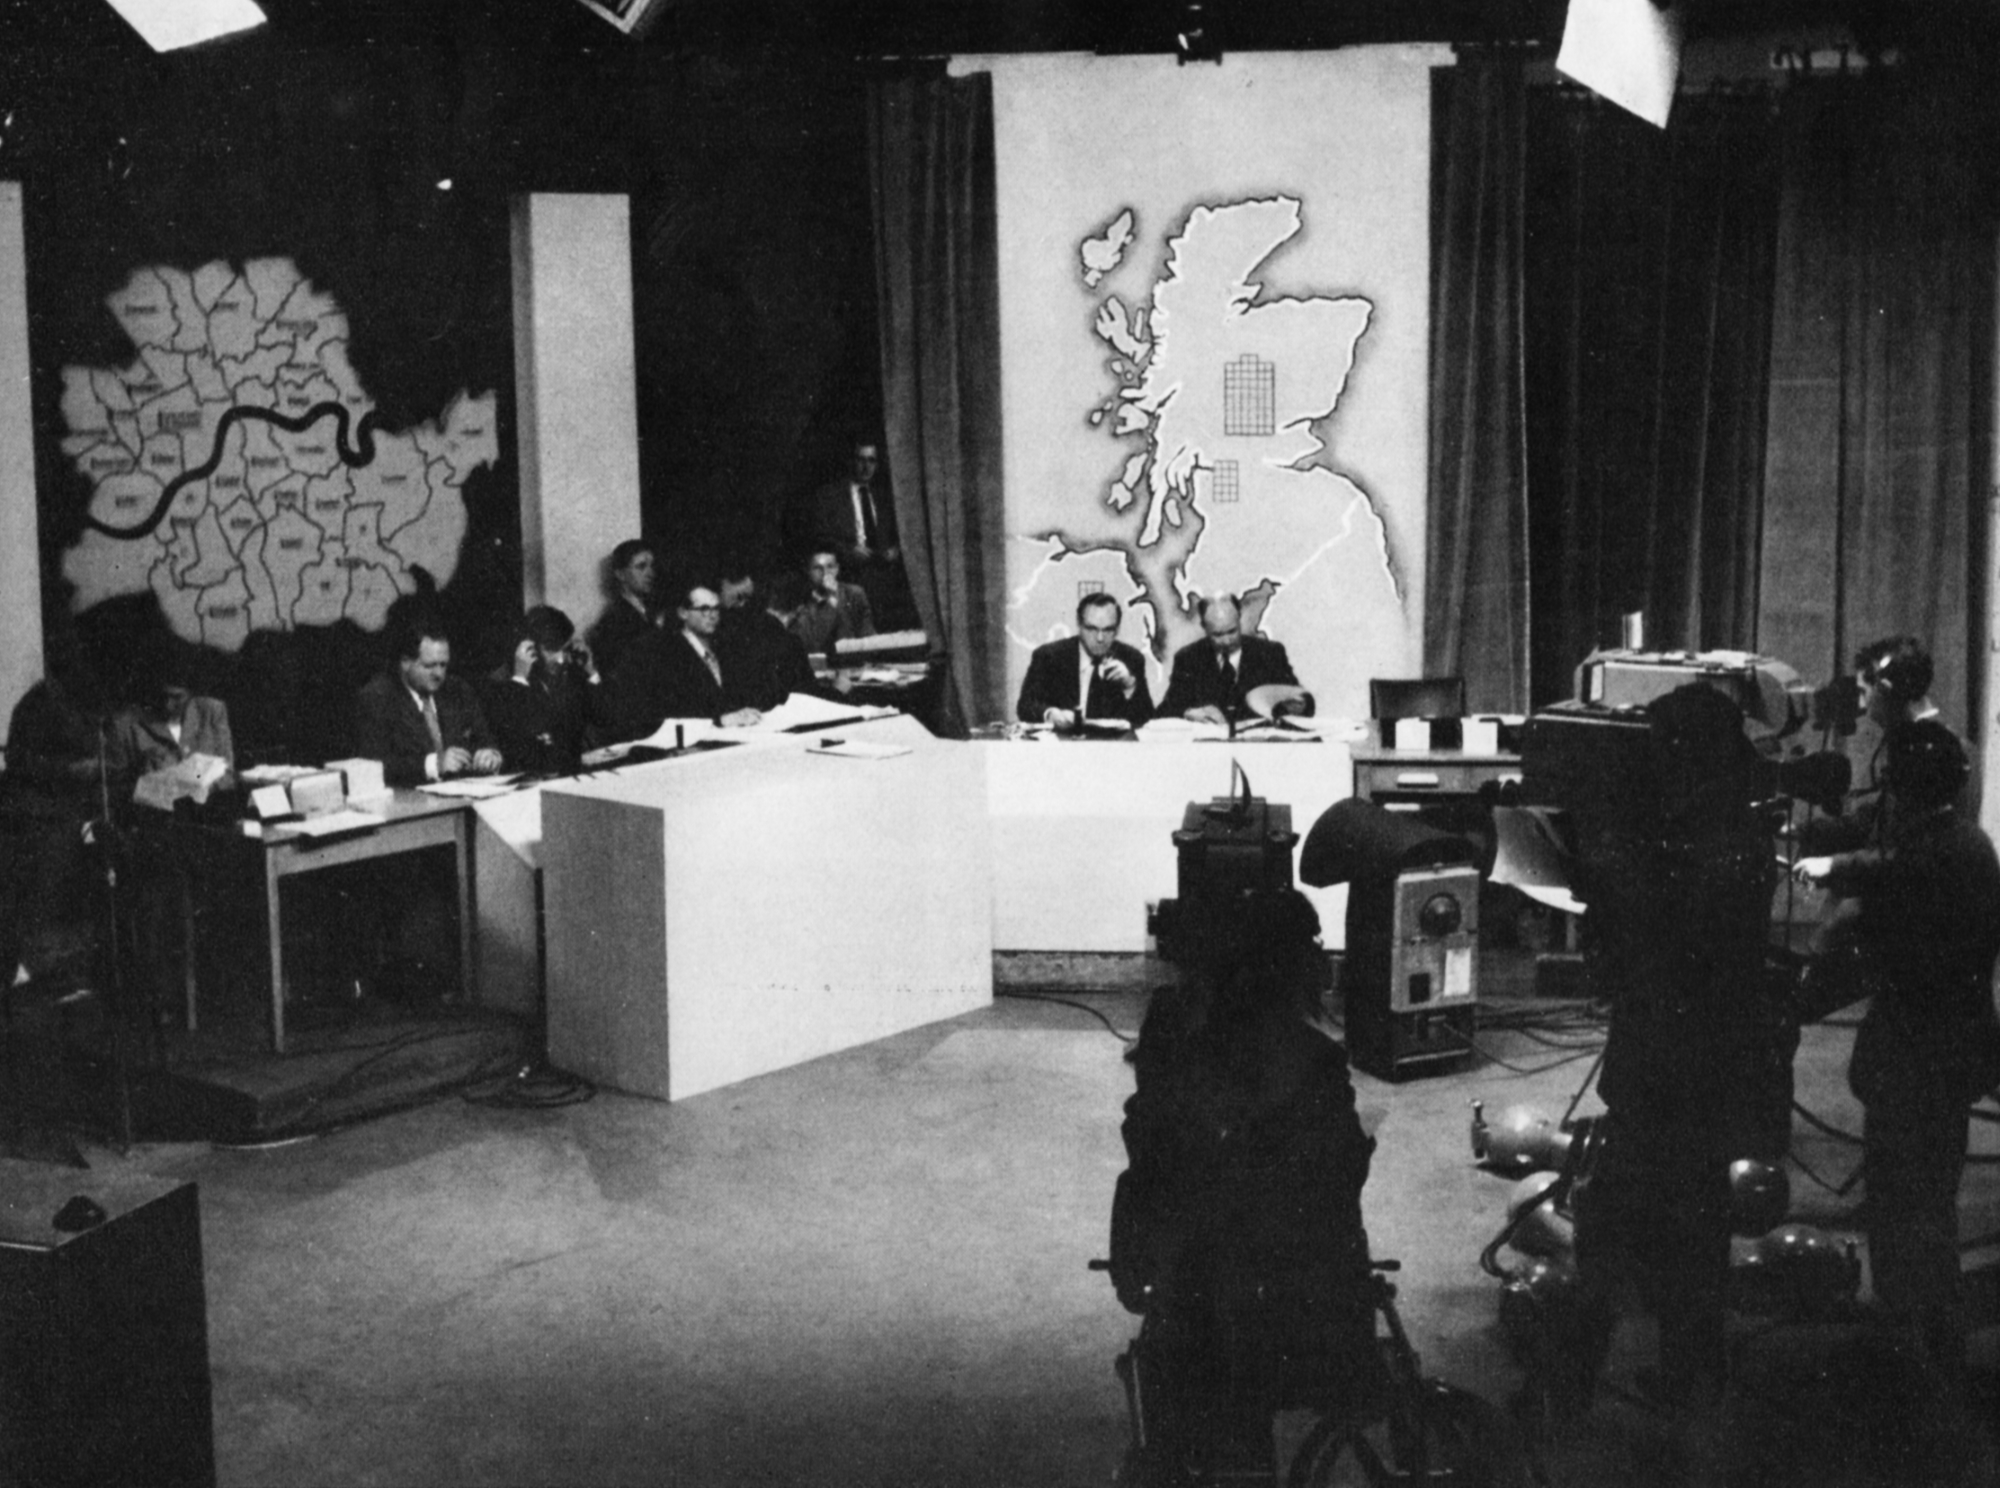 Presenters site behind desks with maps of Scotland and London behind them